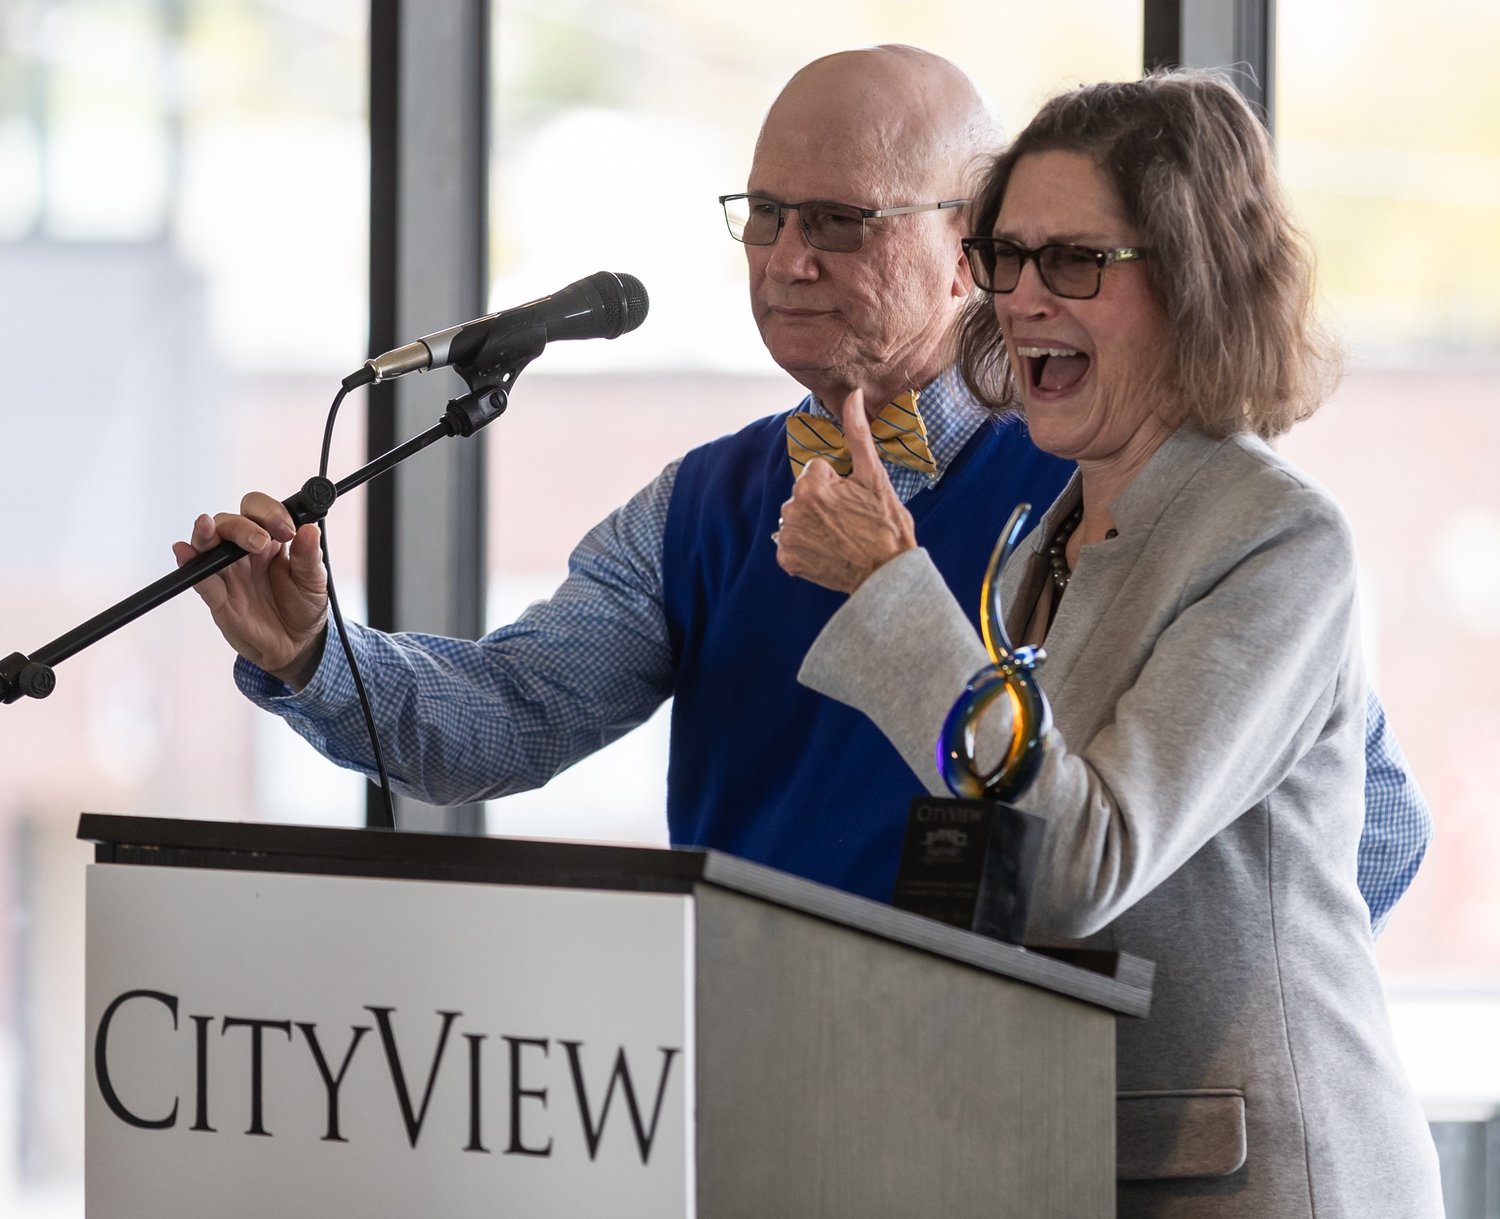 Lucy Jones gestures to someone in the audience as she and her husband, Wes, accept their CityView Community Impact Awards on Wednesday.